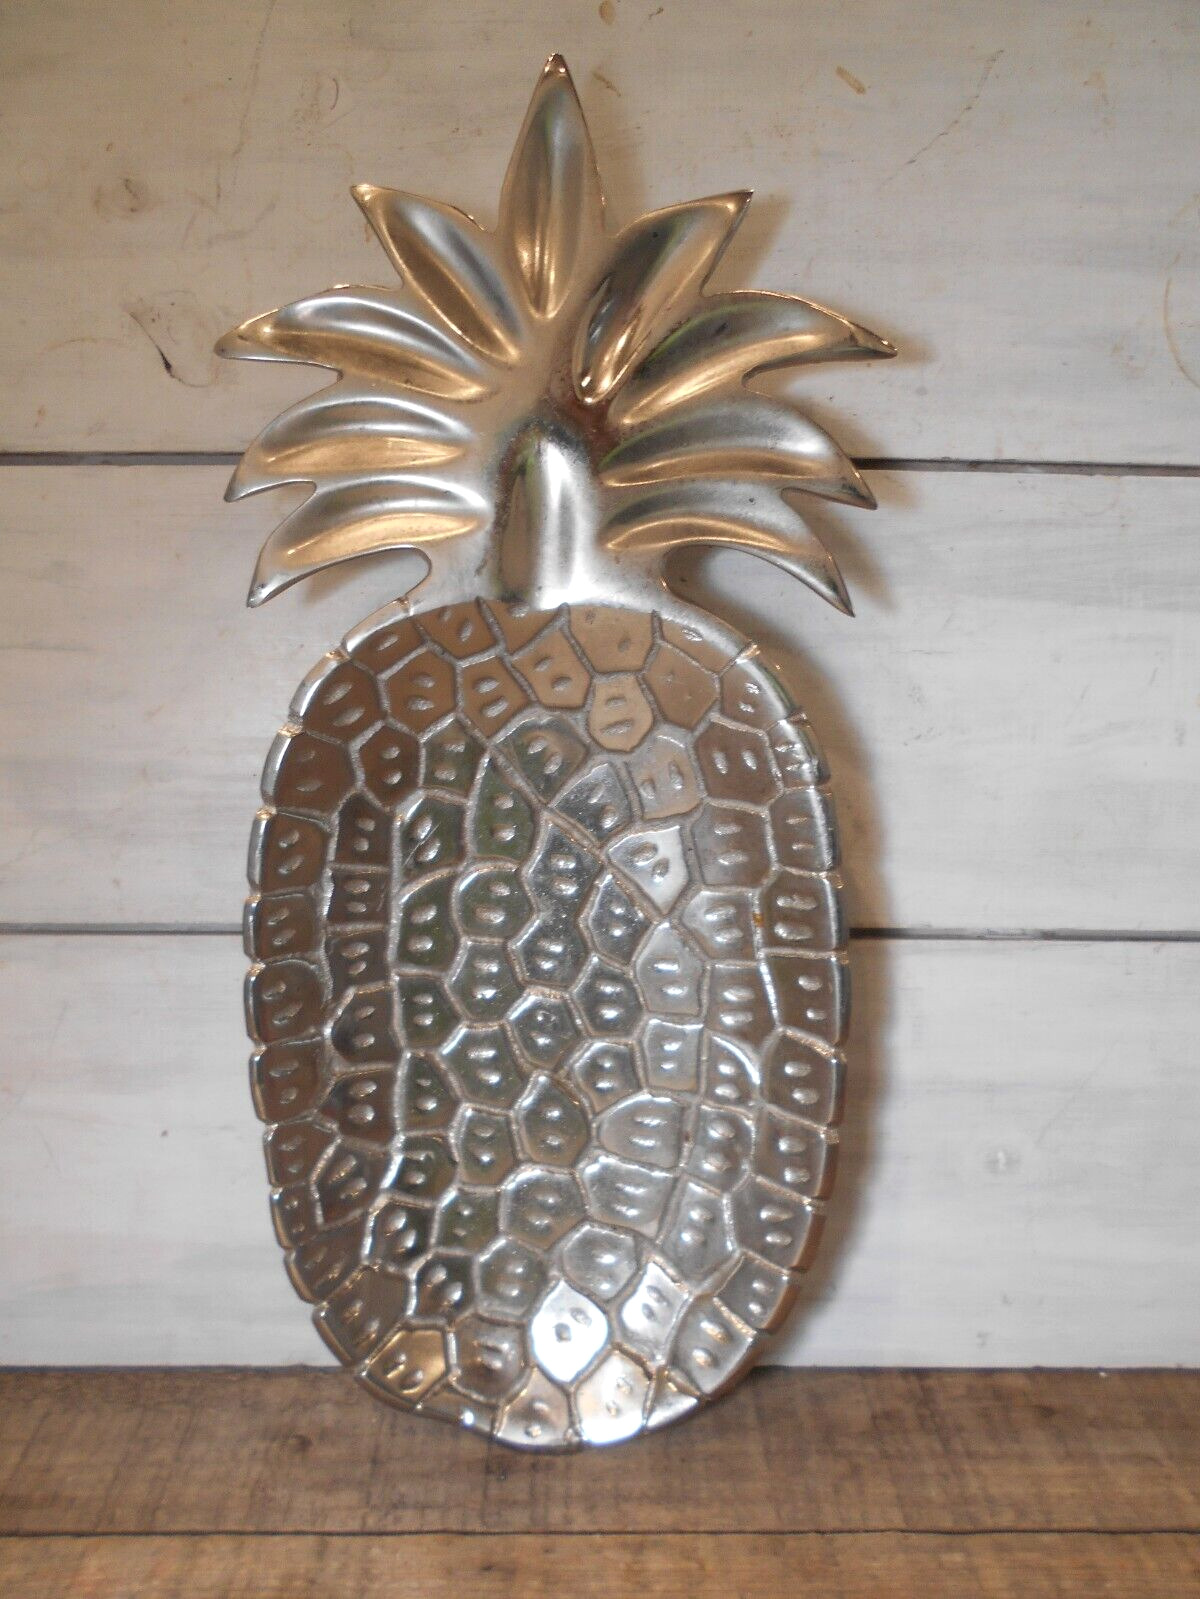 Pineapple Shaped Metal Serving or Decorative Plate / Platter / Tray Silver Color